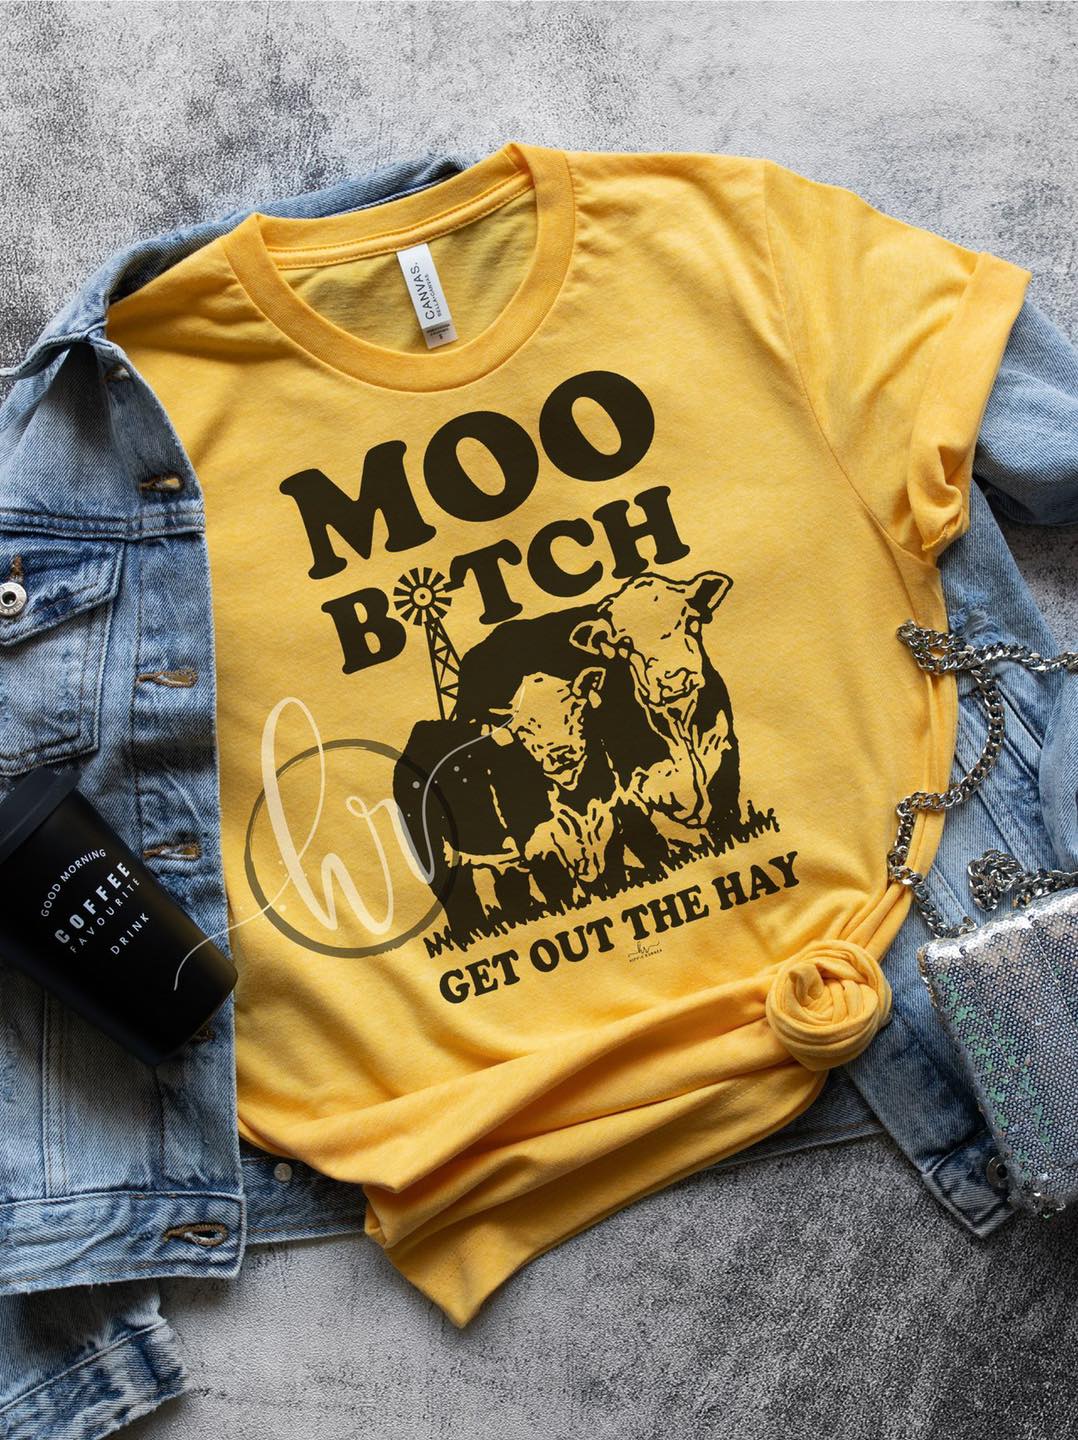 Moo bitch get out the hay - Cow moo